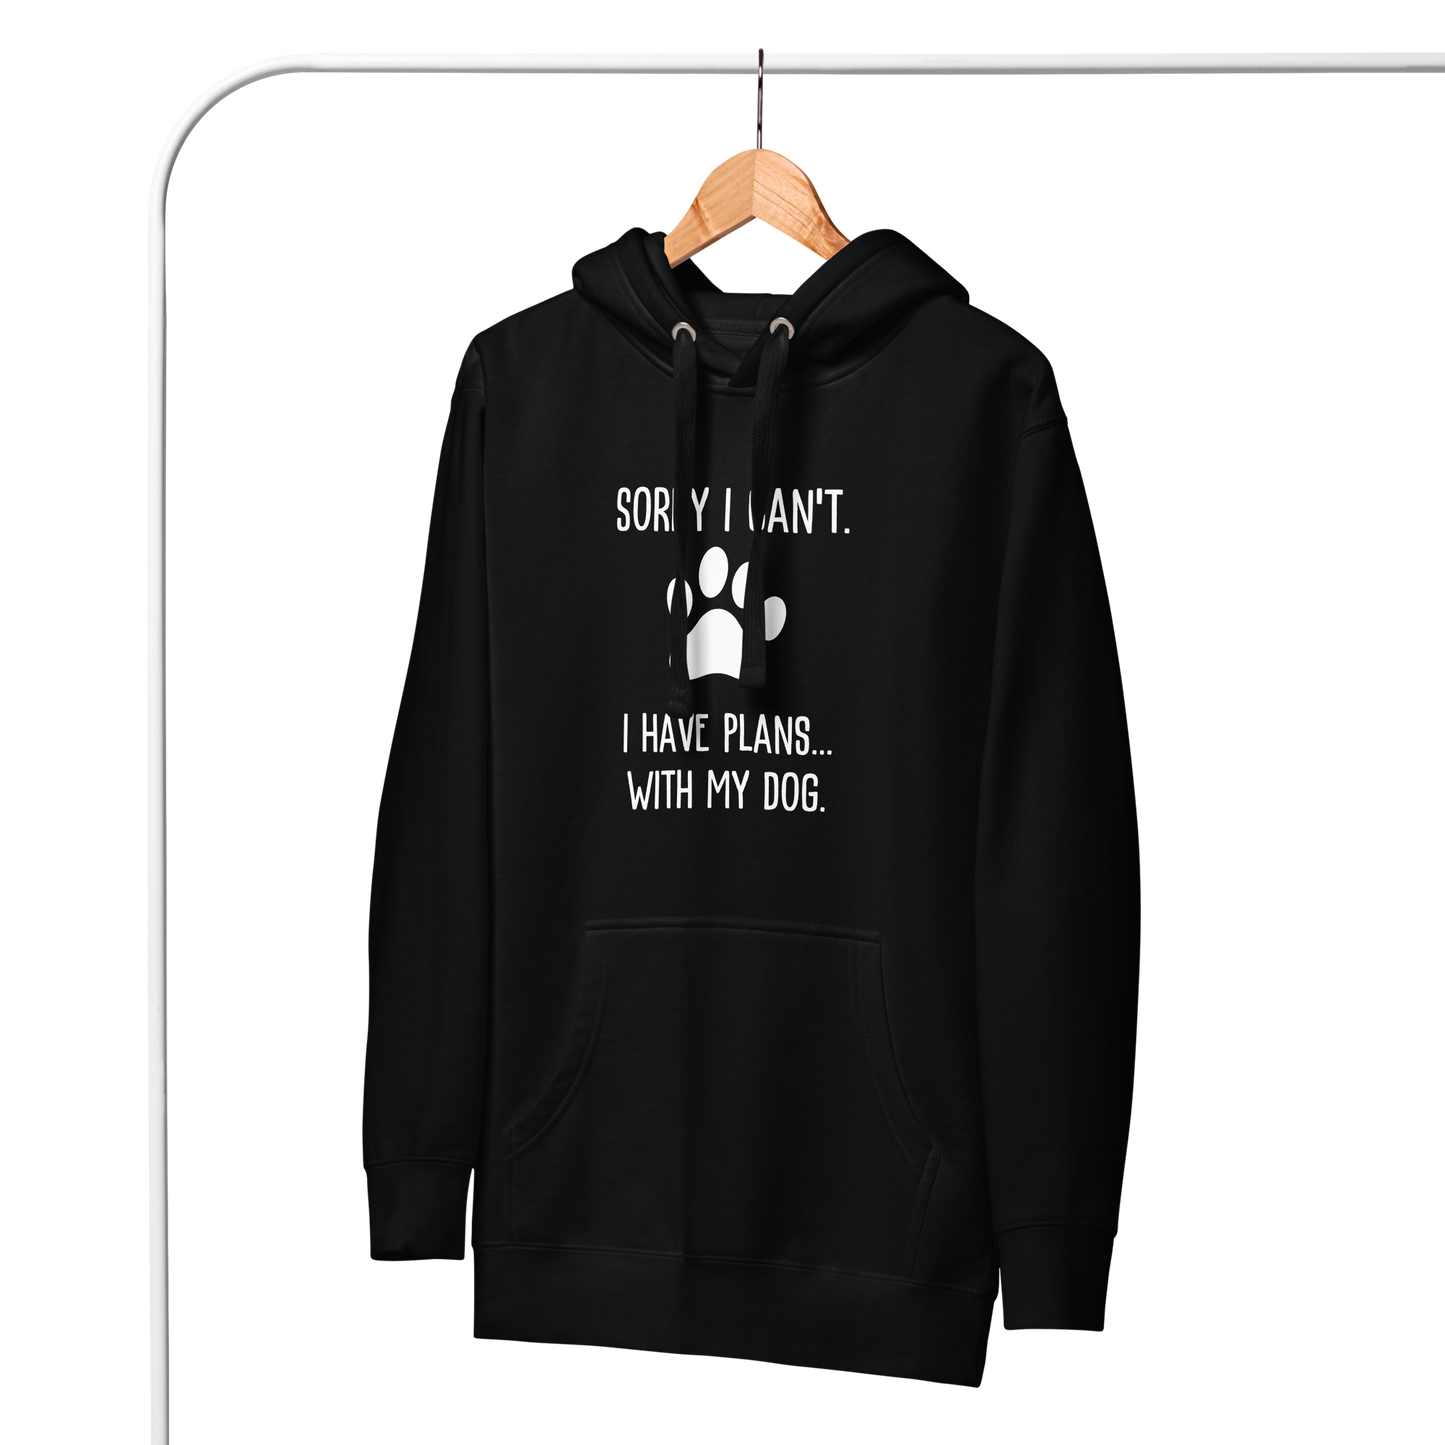 Dog Lovers Unisex Hoodie - Sorry I Can't. I Have Plans...With My Dog